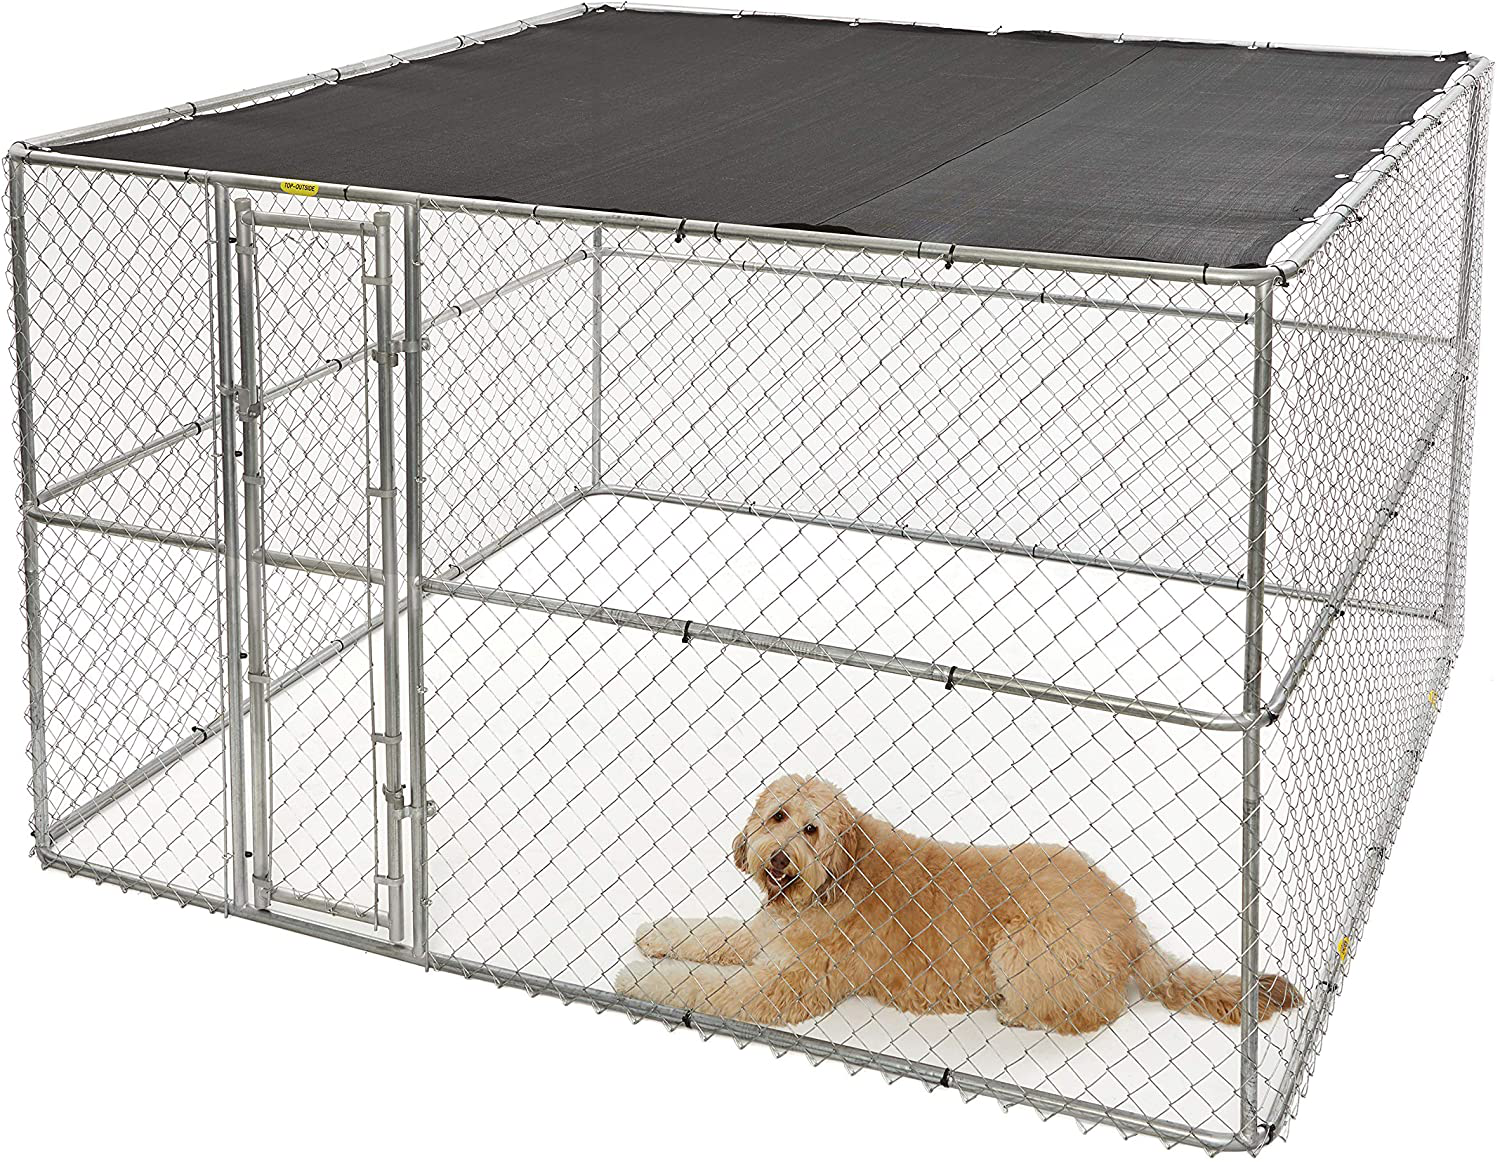 Midwest Homes for Pets K9 Dog Kennel | Four Outdoor Dog Kennel W/Free Sunscreen | Durable Galvanized Steel Dog Kennel Includes a 1-Year Manufacturer'S Warranty Animals & Pet Supplies > Pet Supplies > Dog Supplies > Dog Kennels & Runs MidWest Homes for Pets 10L x 10W x 6H Feet  